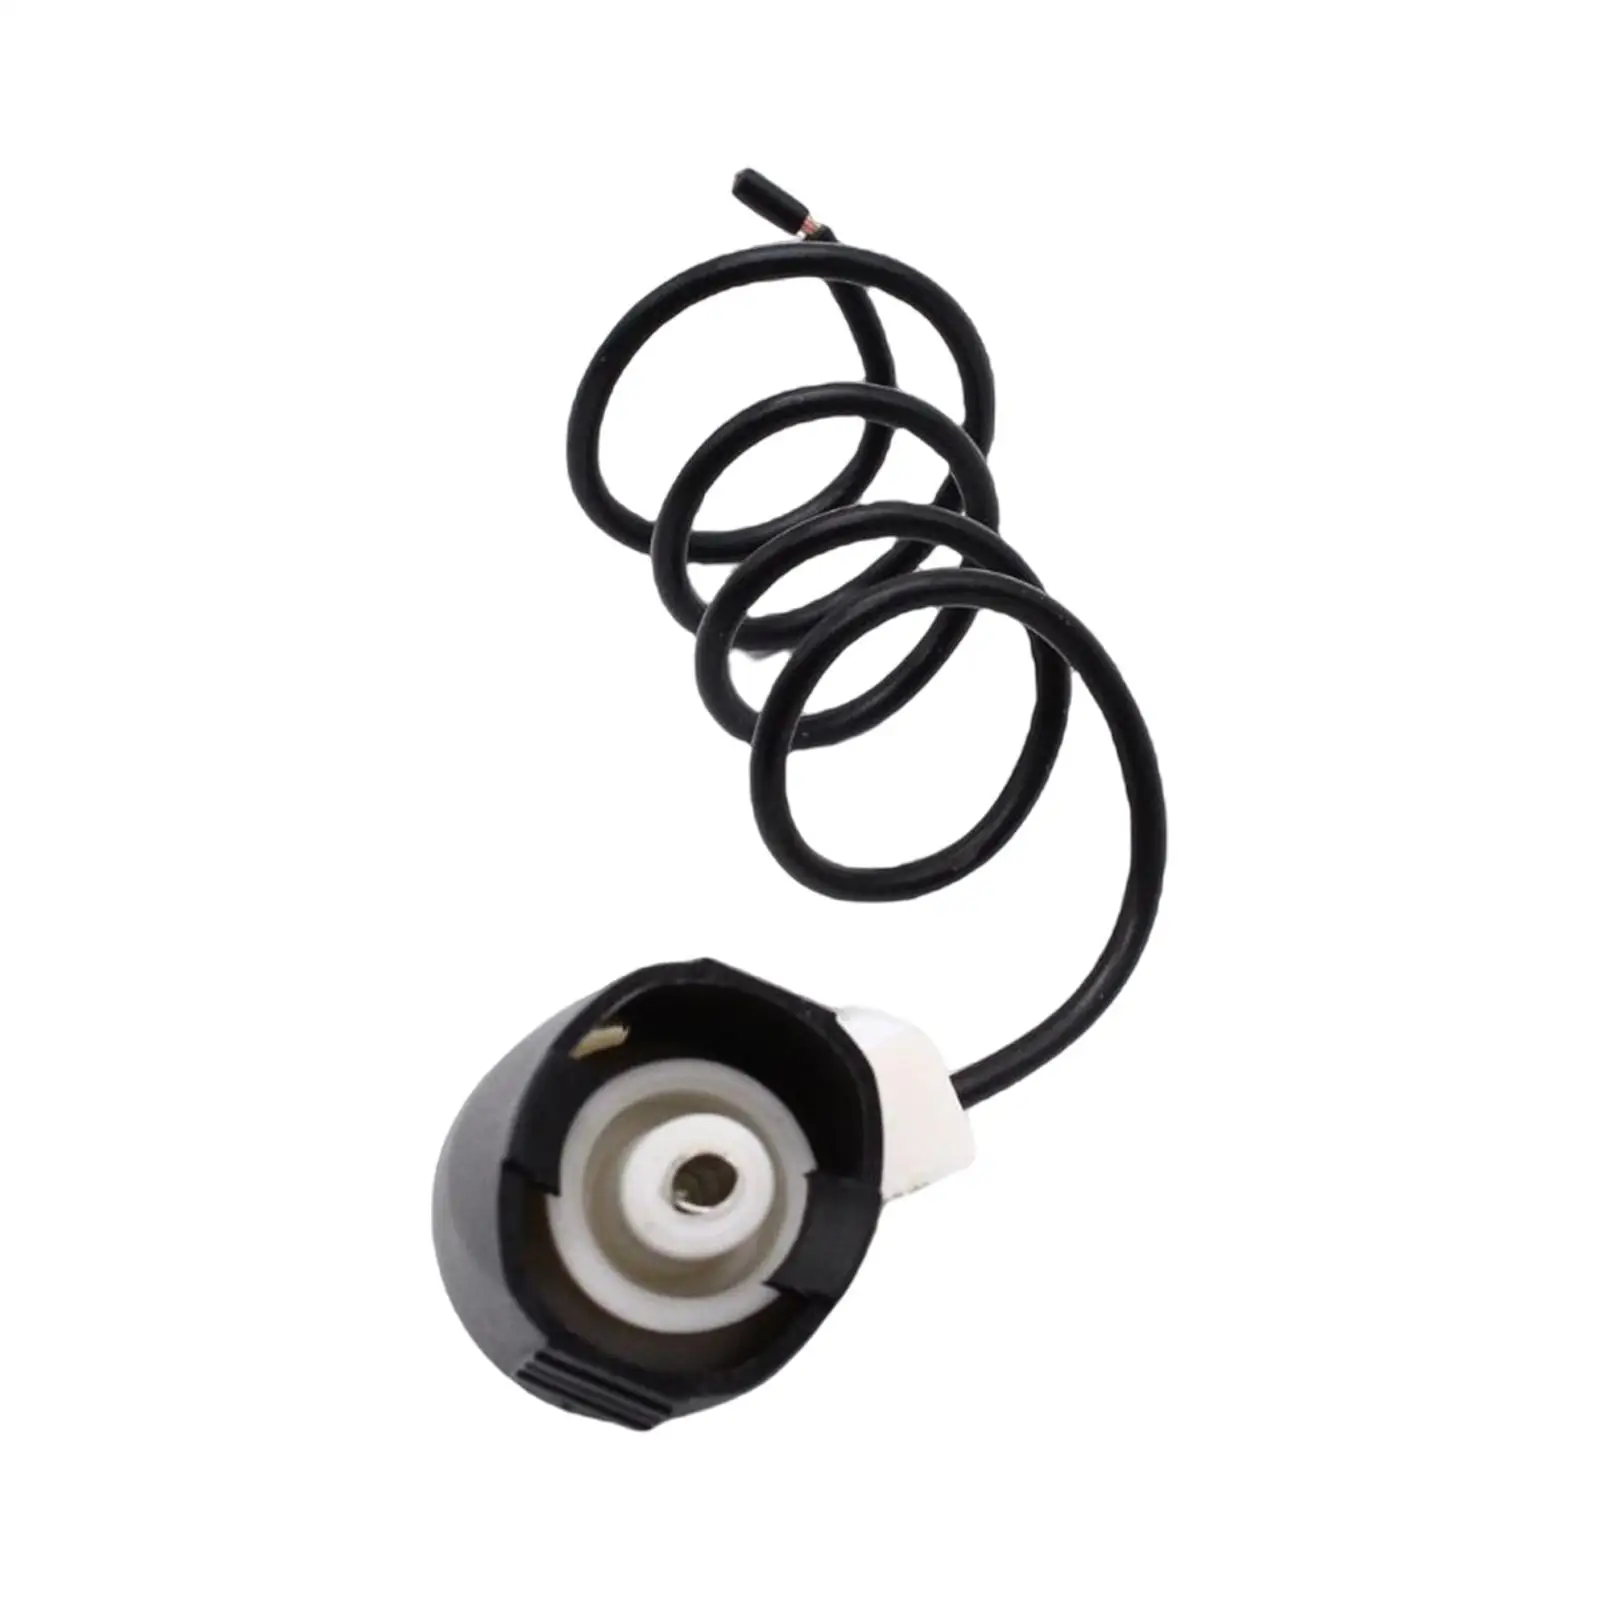 Automotive Brake Proportioning Valve Sensor Wire for Pv2 Valve Easily Install Replacement